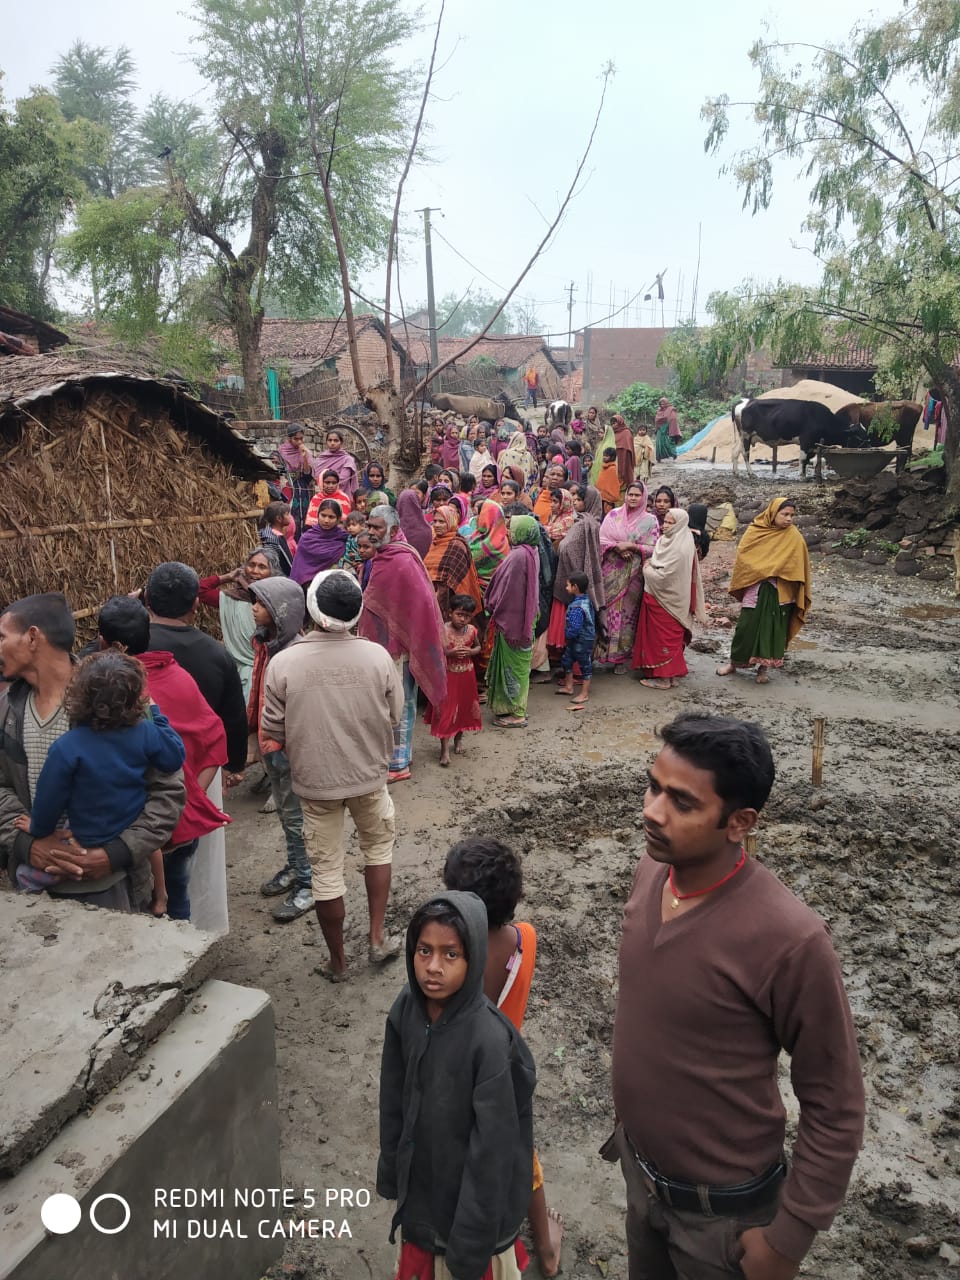 Villagers gathered at deceased's house